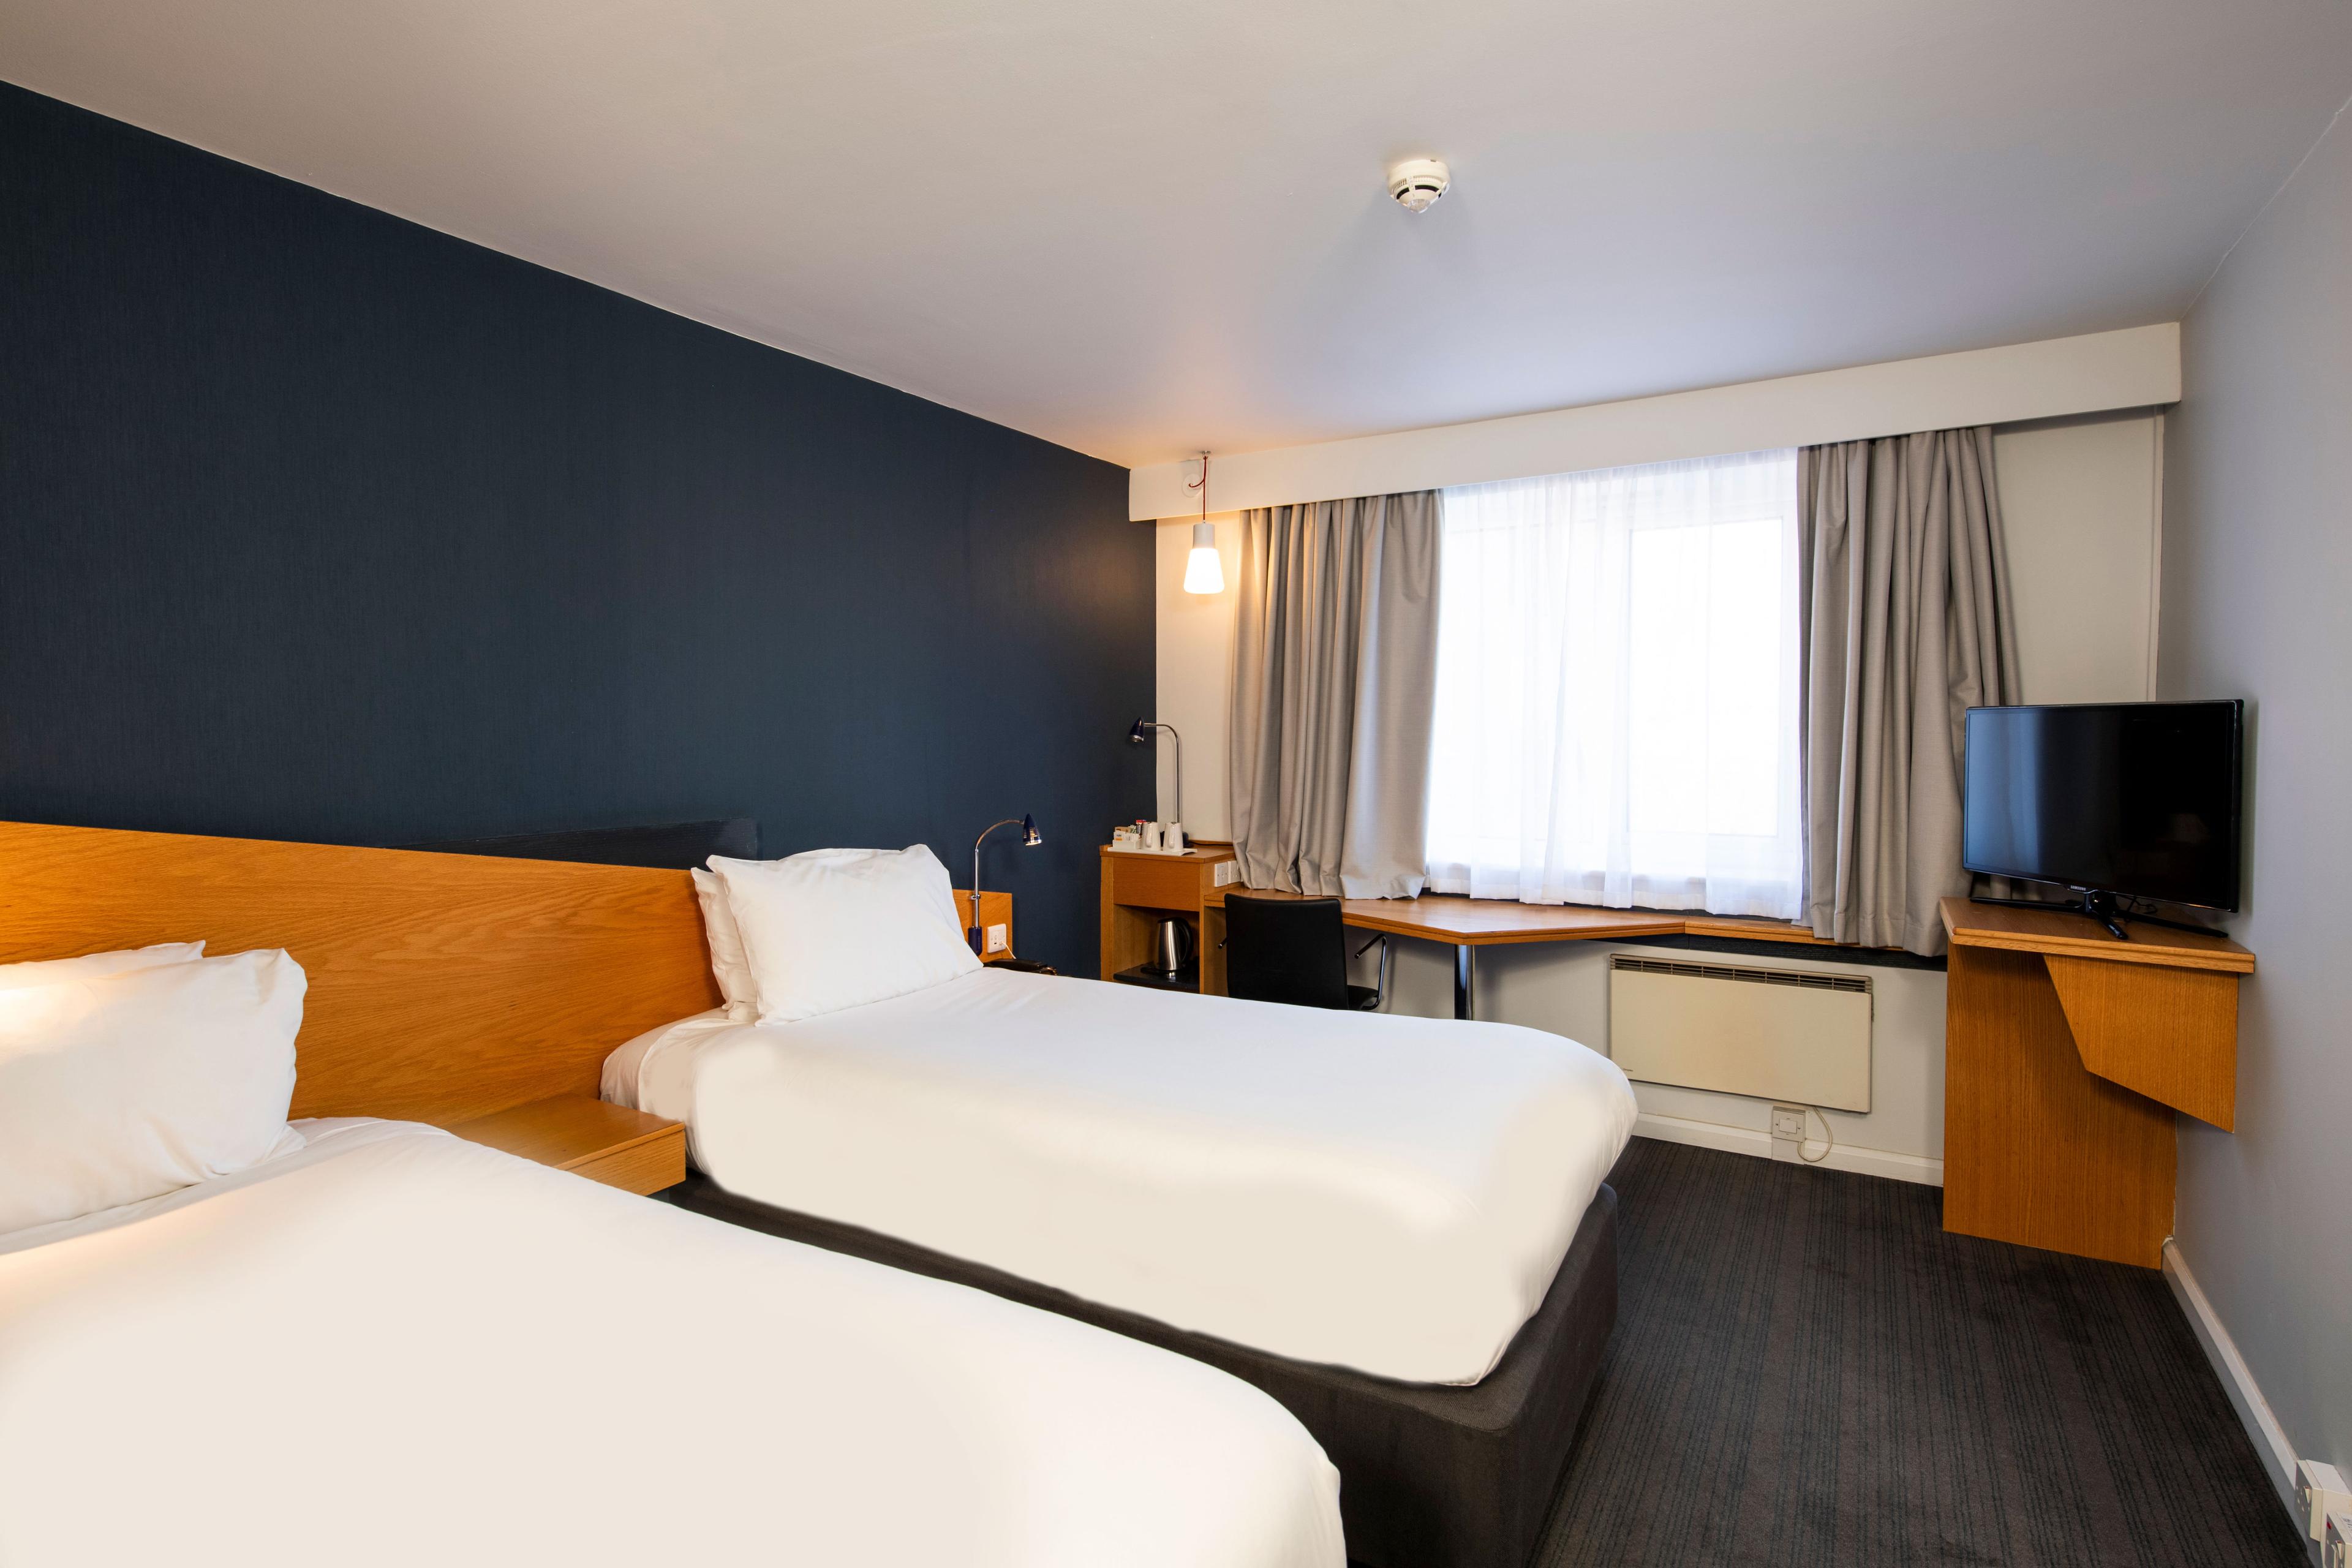 Soft or firm? The pillow choice is all yours at our Salford hotel.